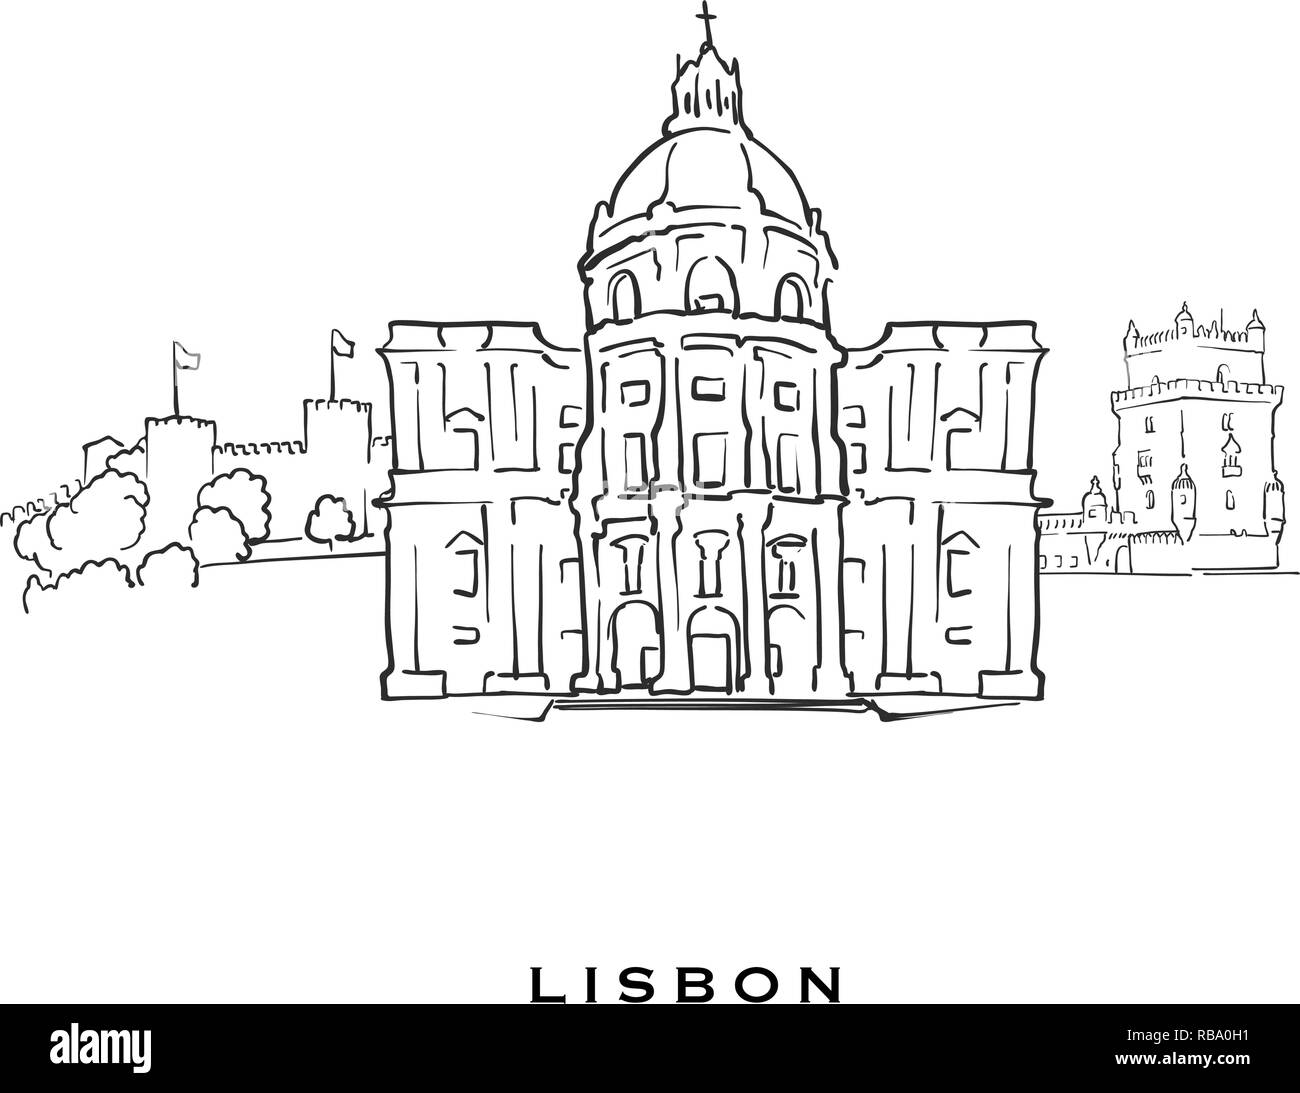 Lisbon Portugal famous architecture. Outlined vector sketch separated on white background. Architecture drawings of all European capitals. Stock Vector